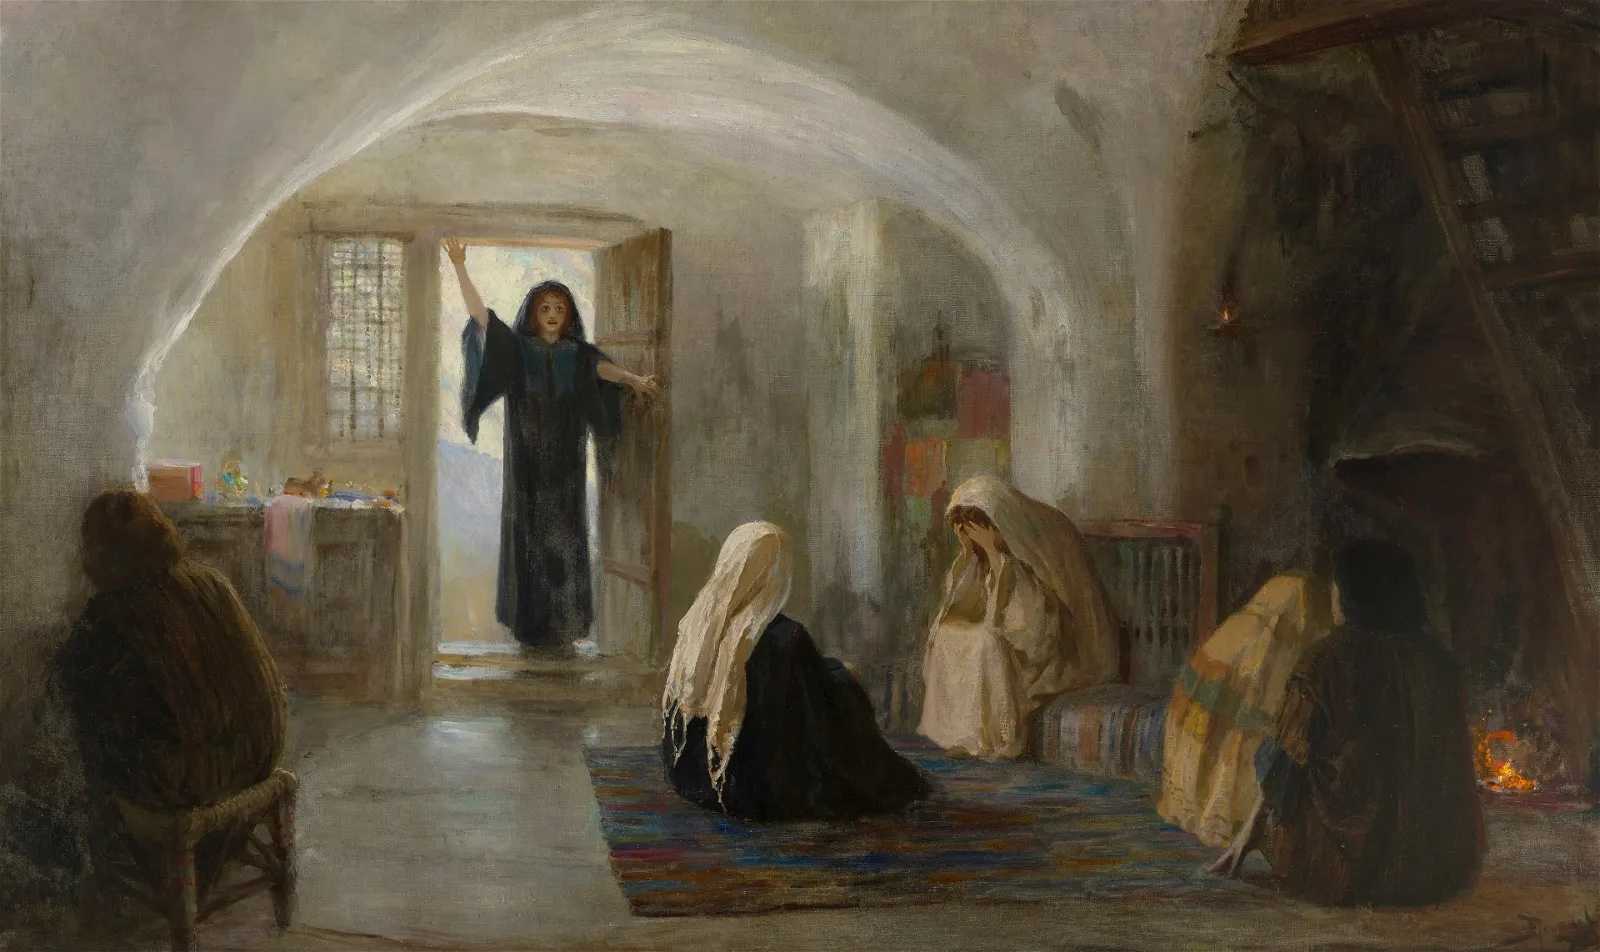 ‘And she went and told them that she had been with Him as they mourned and wept’ by Vasilii Dmitrievich Polenov, which sold for $1,738,013 with buyer’s premium at Bonhams March 20.